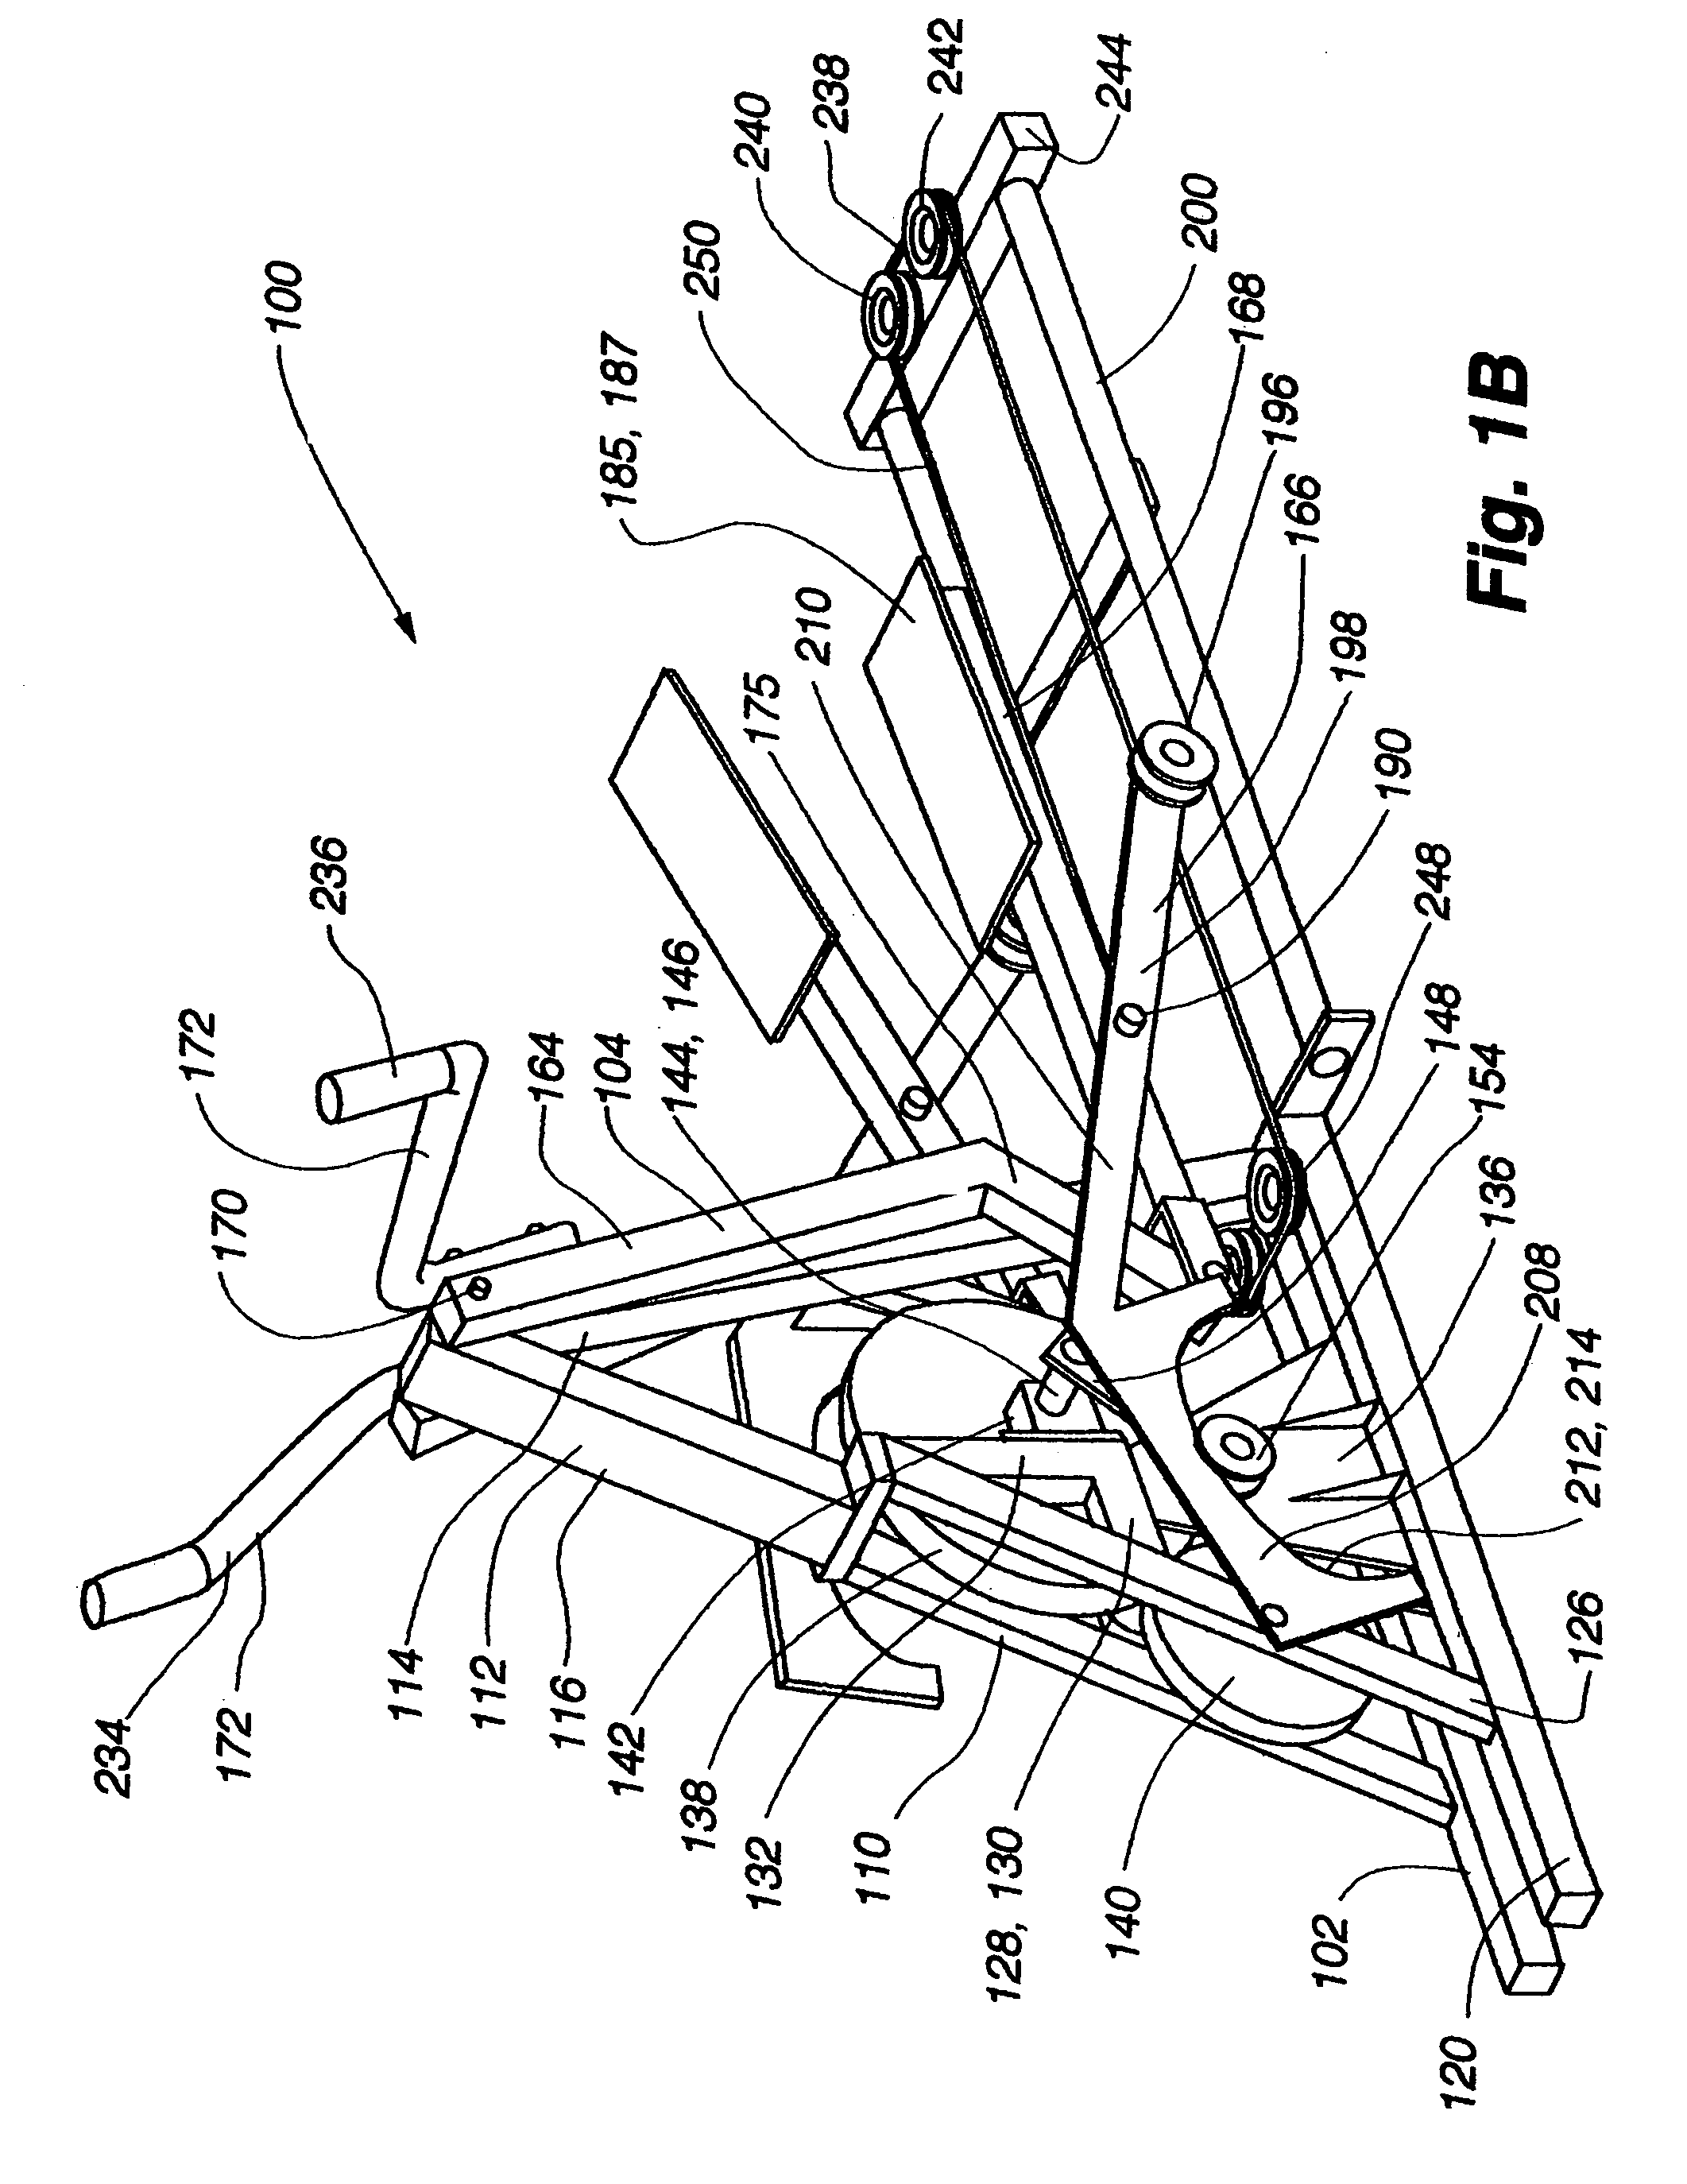 Releasable connection mechanism for variable stride exercise devices